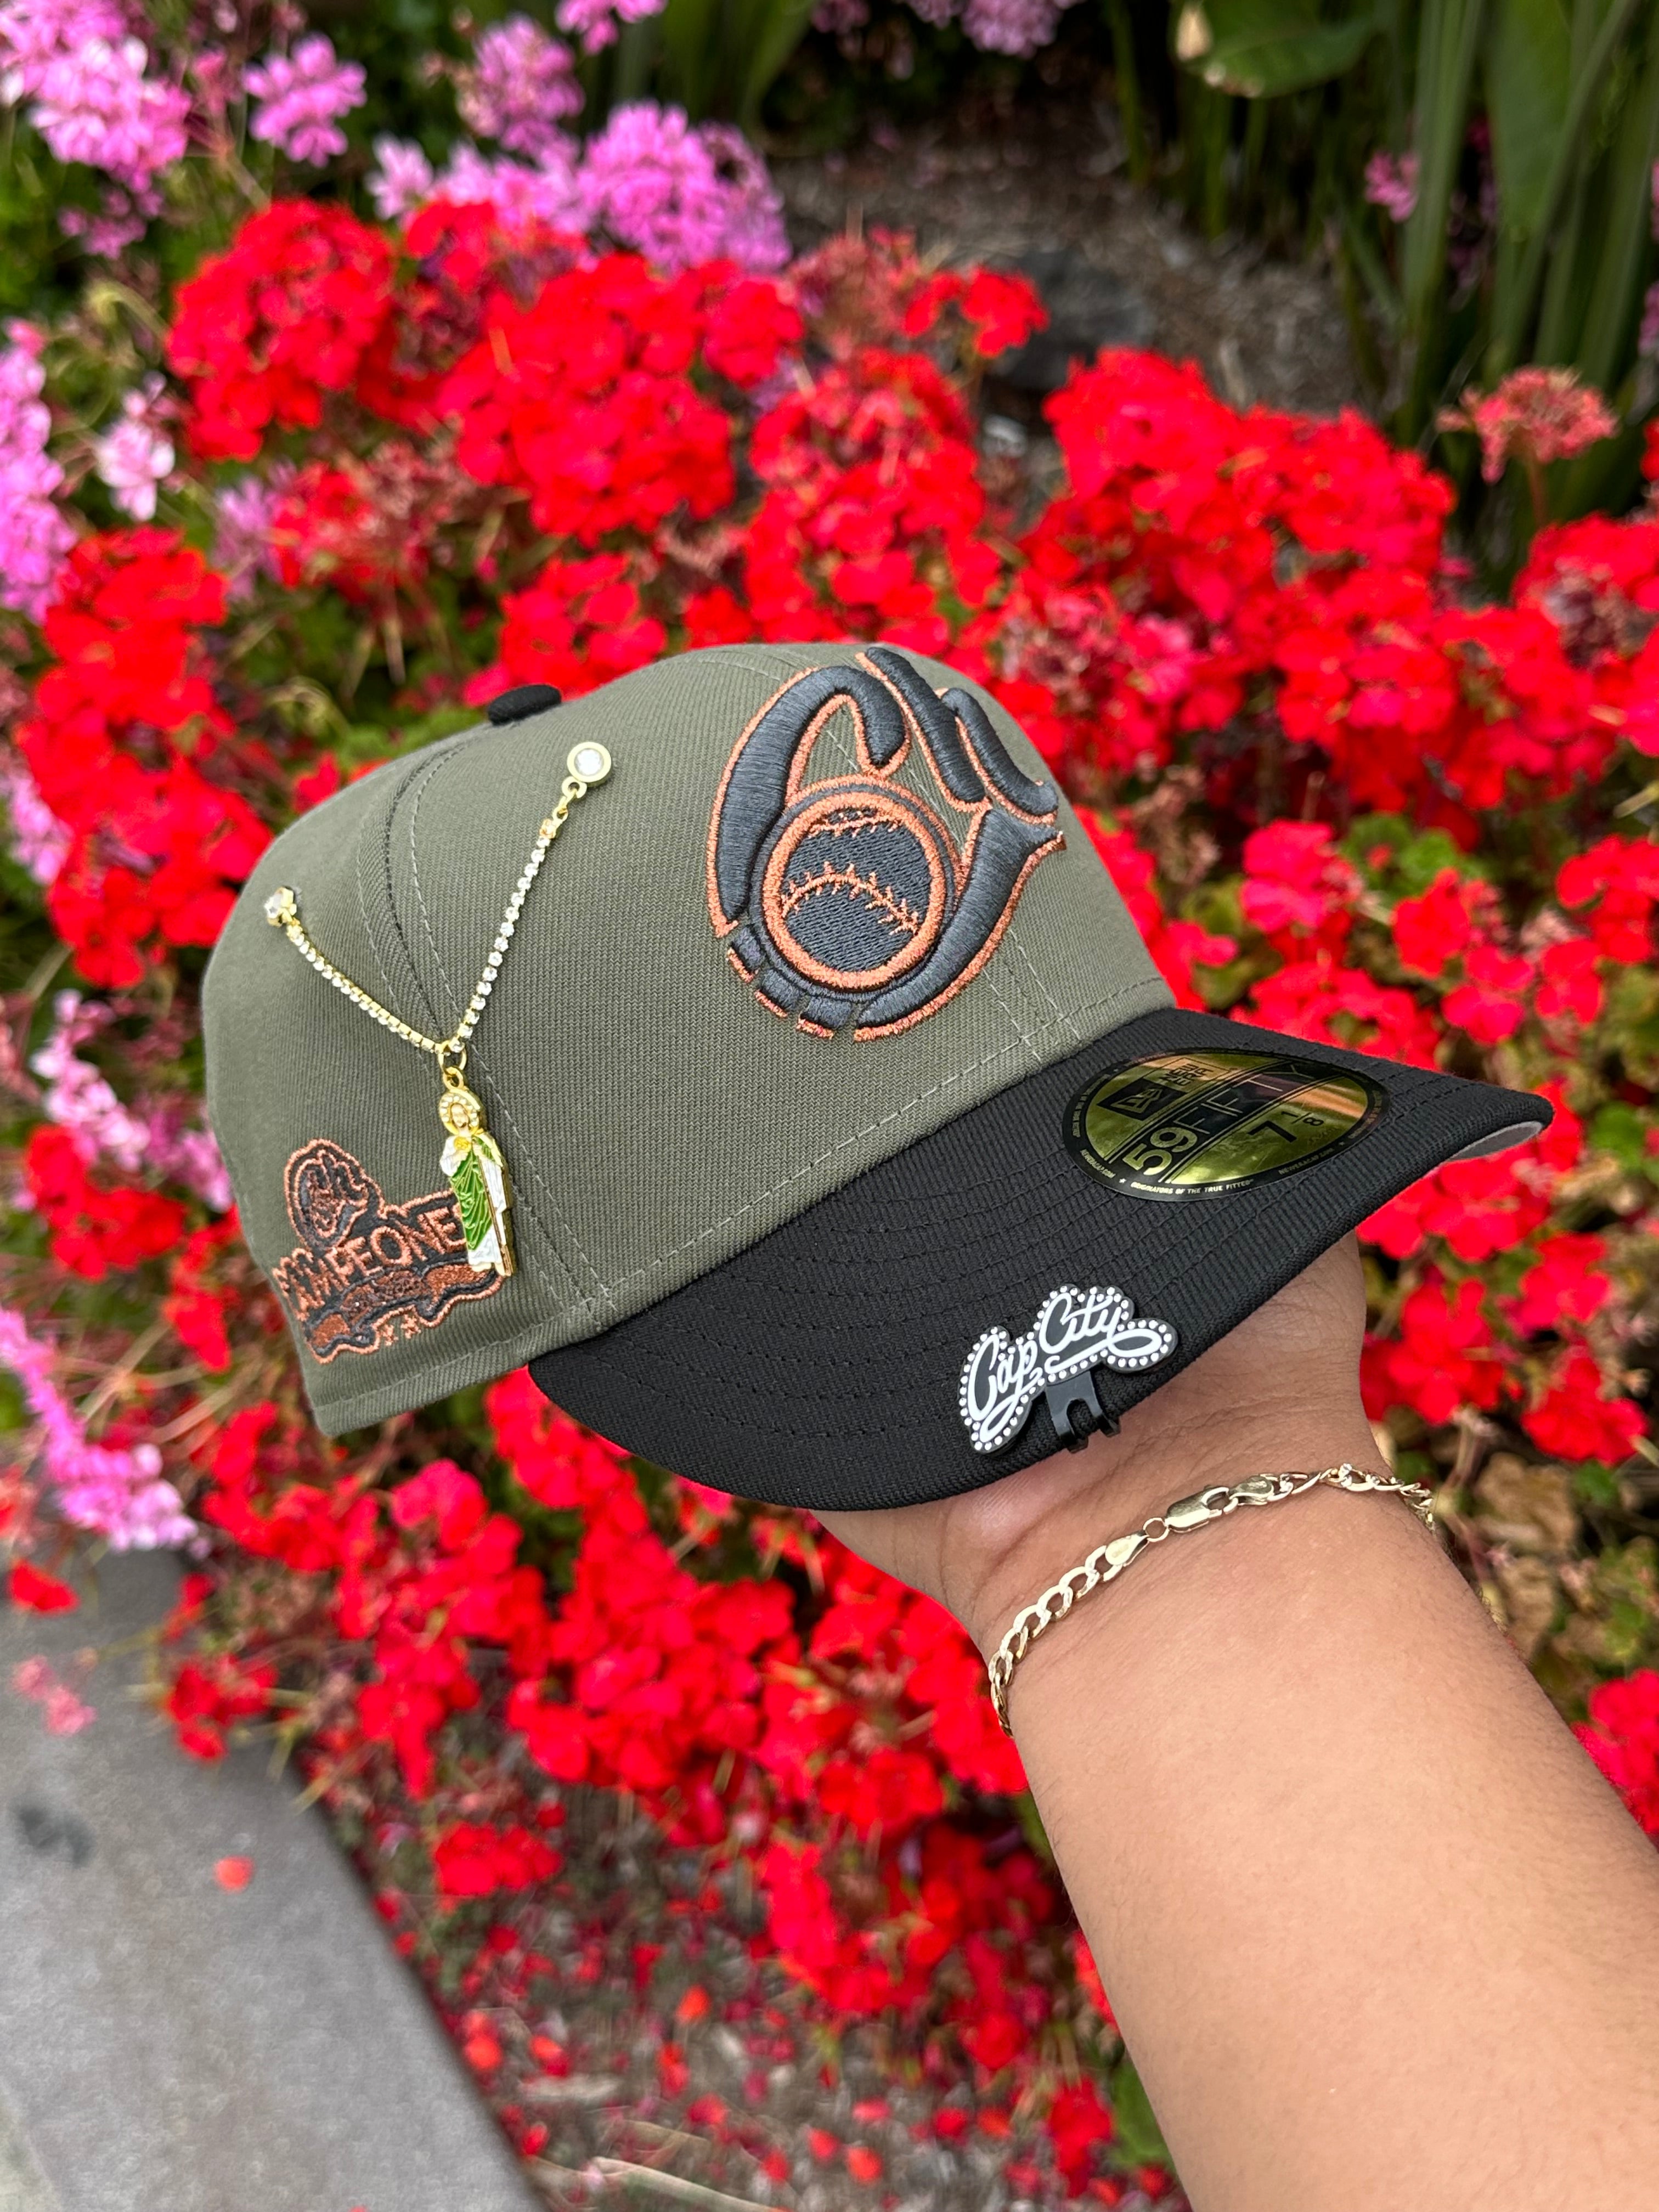 NEW ERA EXCLUSIVE 59FIFTY OLIVE GREEN/BLACK CHARROS DE JALISCO W/ CAMPEONES SIDE PATCH